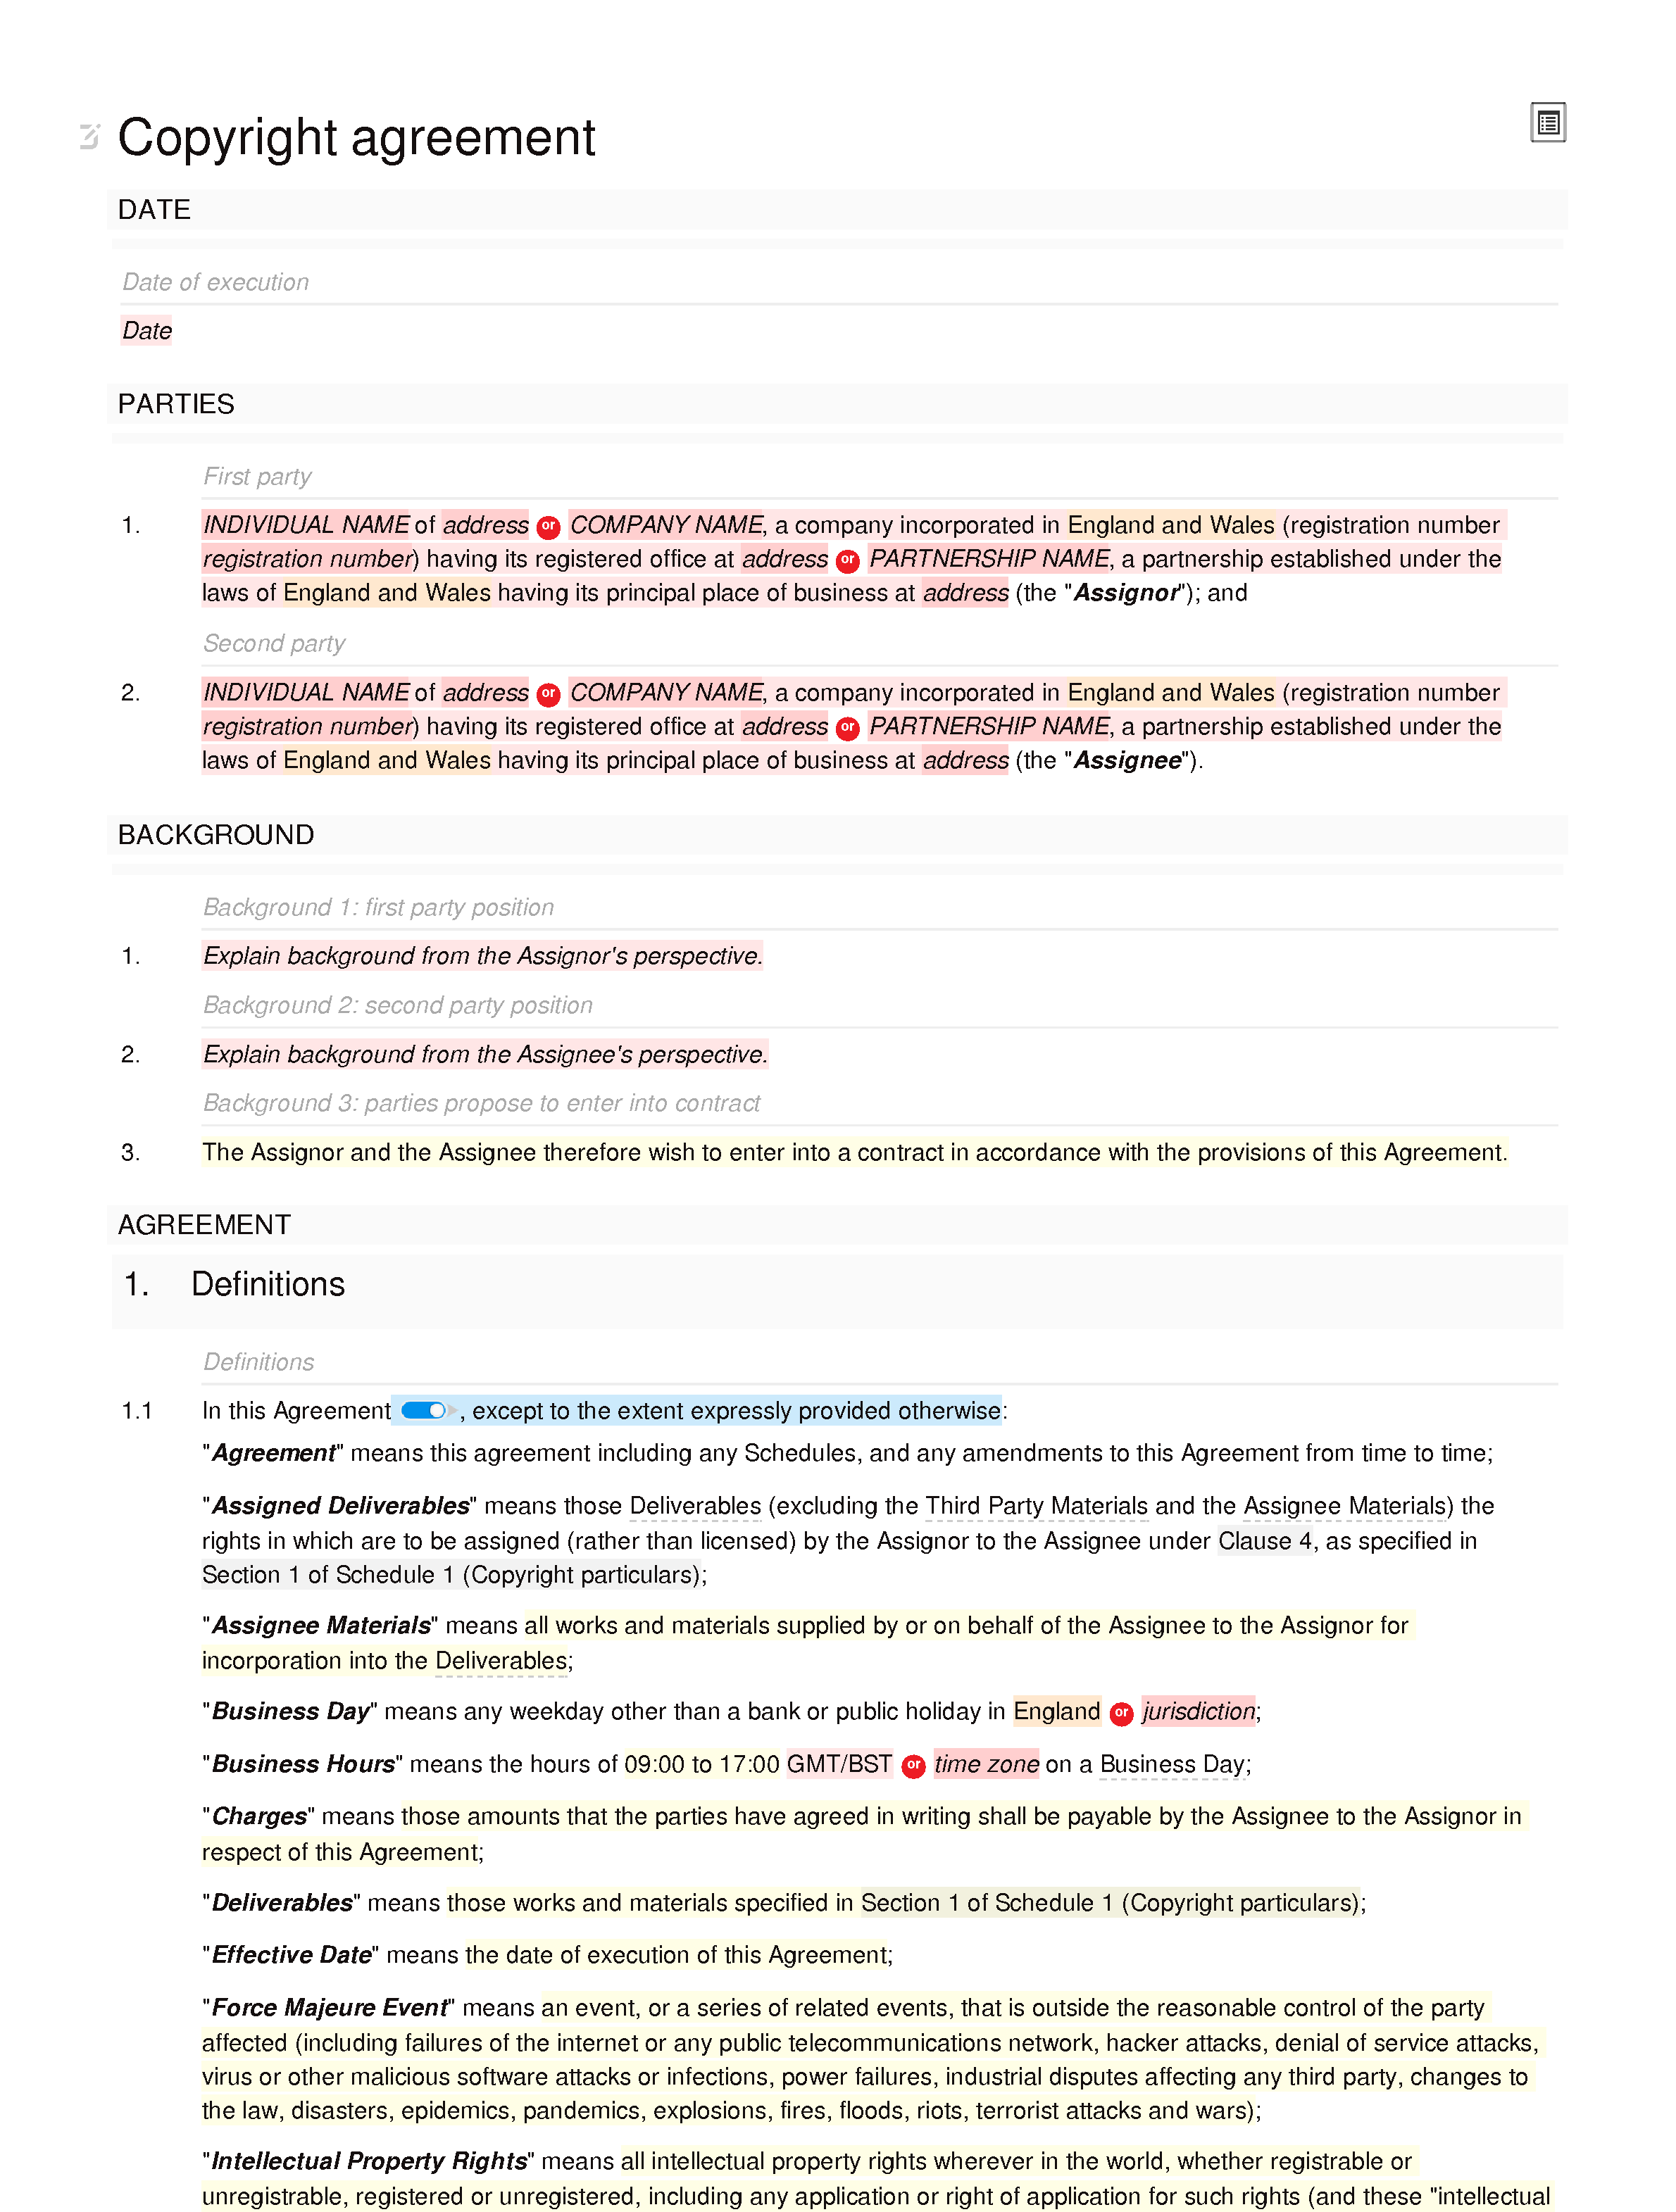 Copyright agreement document editor preview